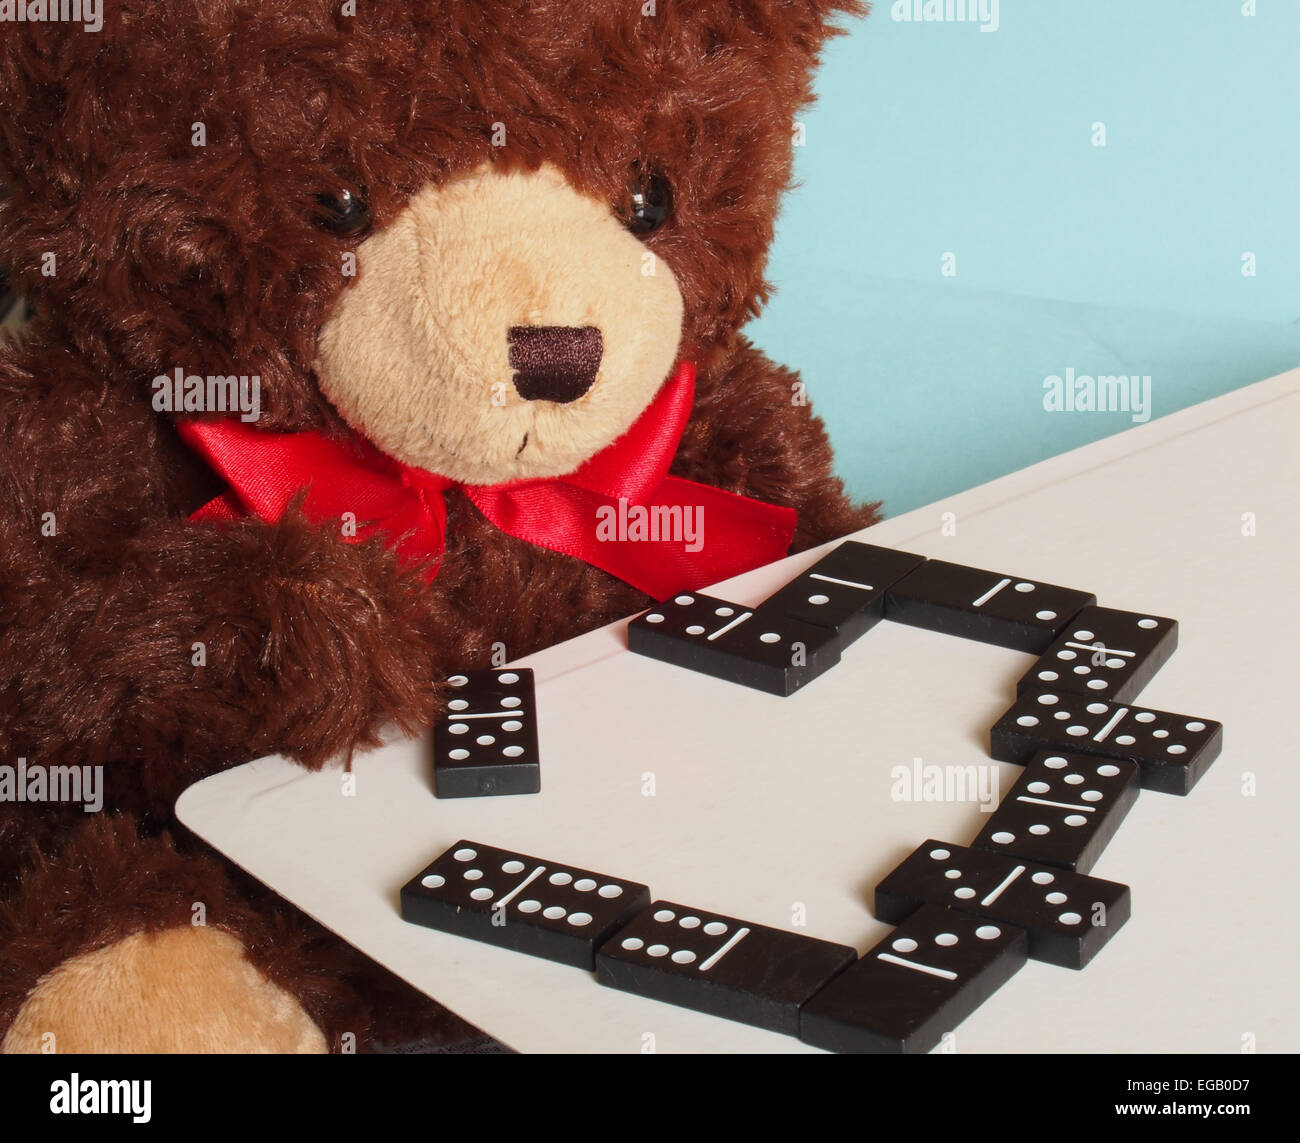 A soft brown teddy bear playing a game of dominoes and concentrating hard wearing a big red ribbon bow Stock Photo